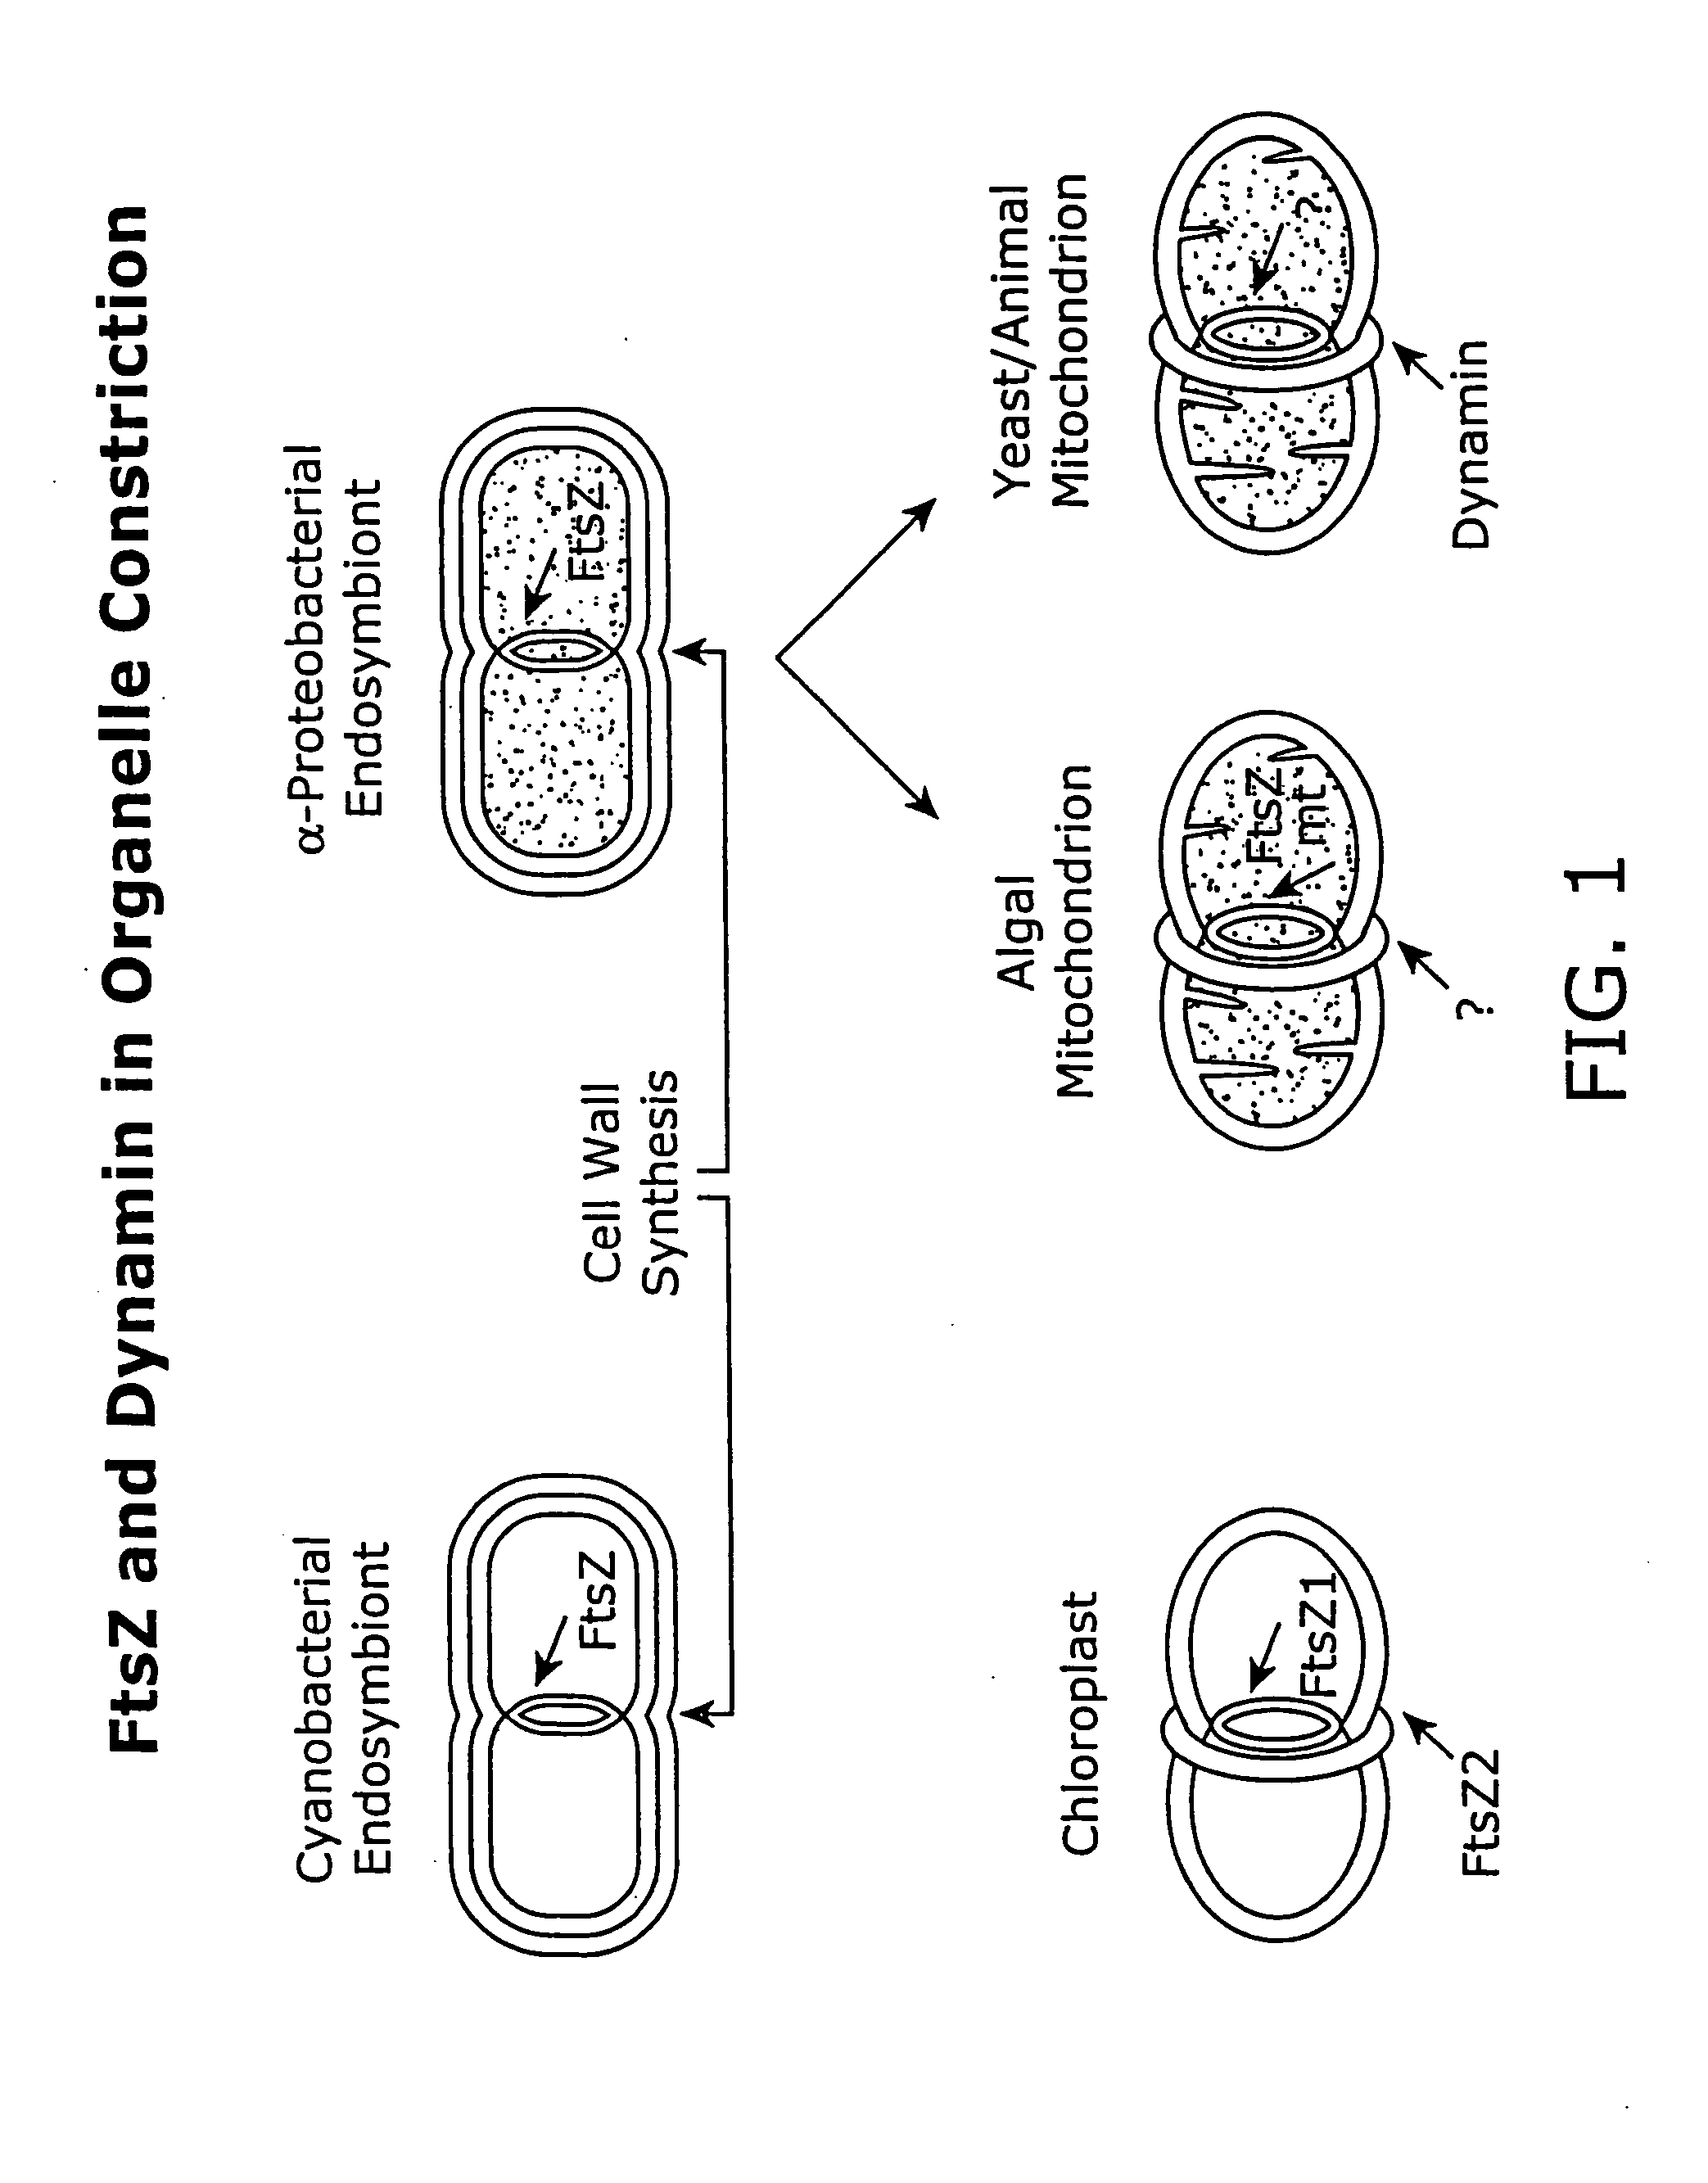 Compound combinations for inhibiting cell division and methods for their identification and use